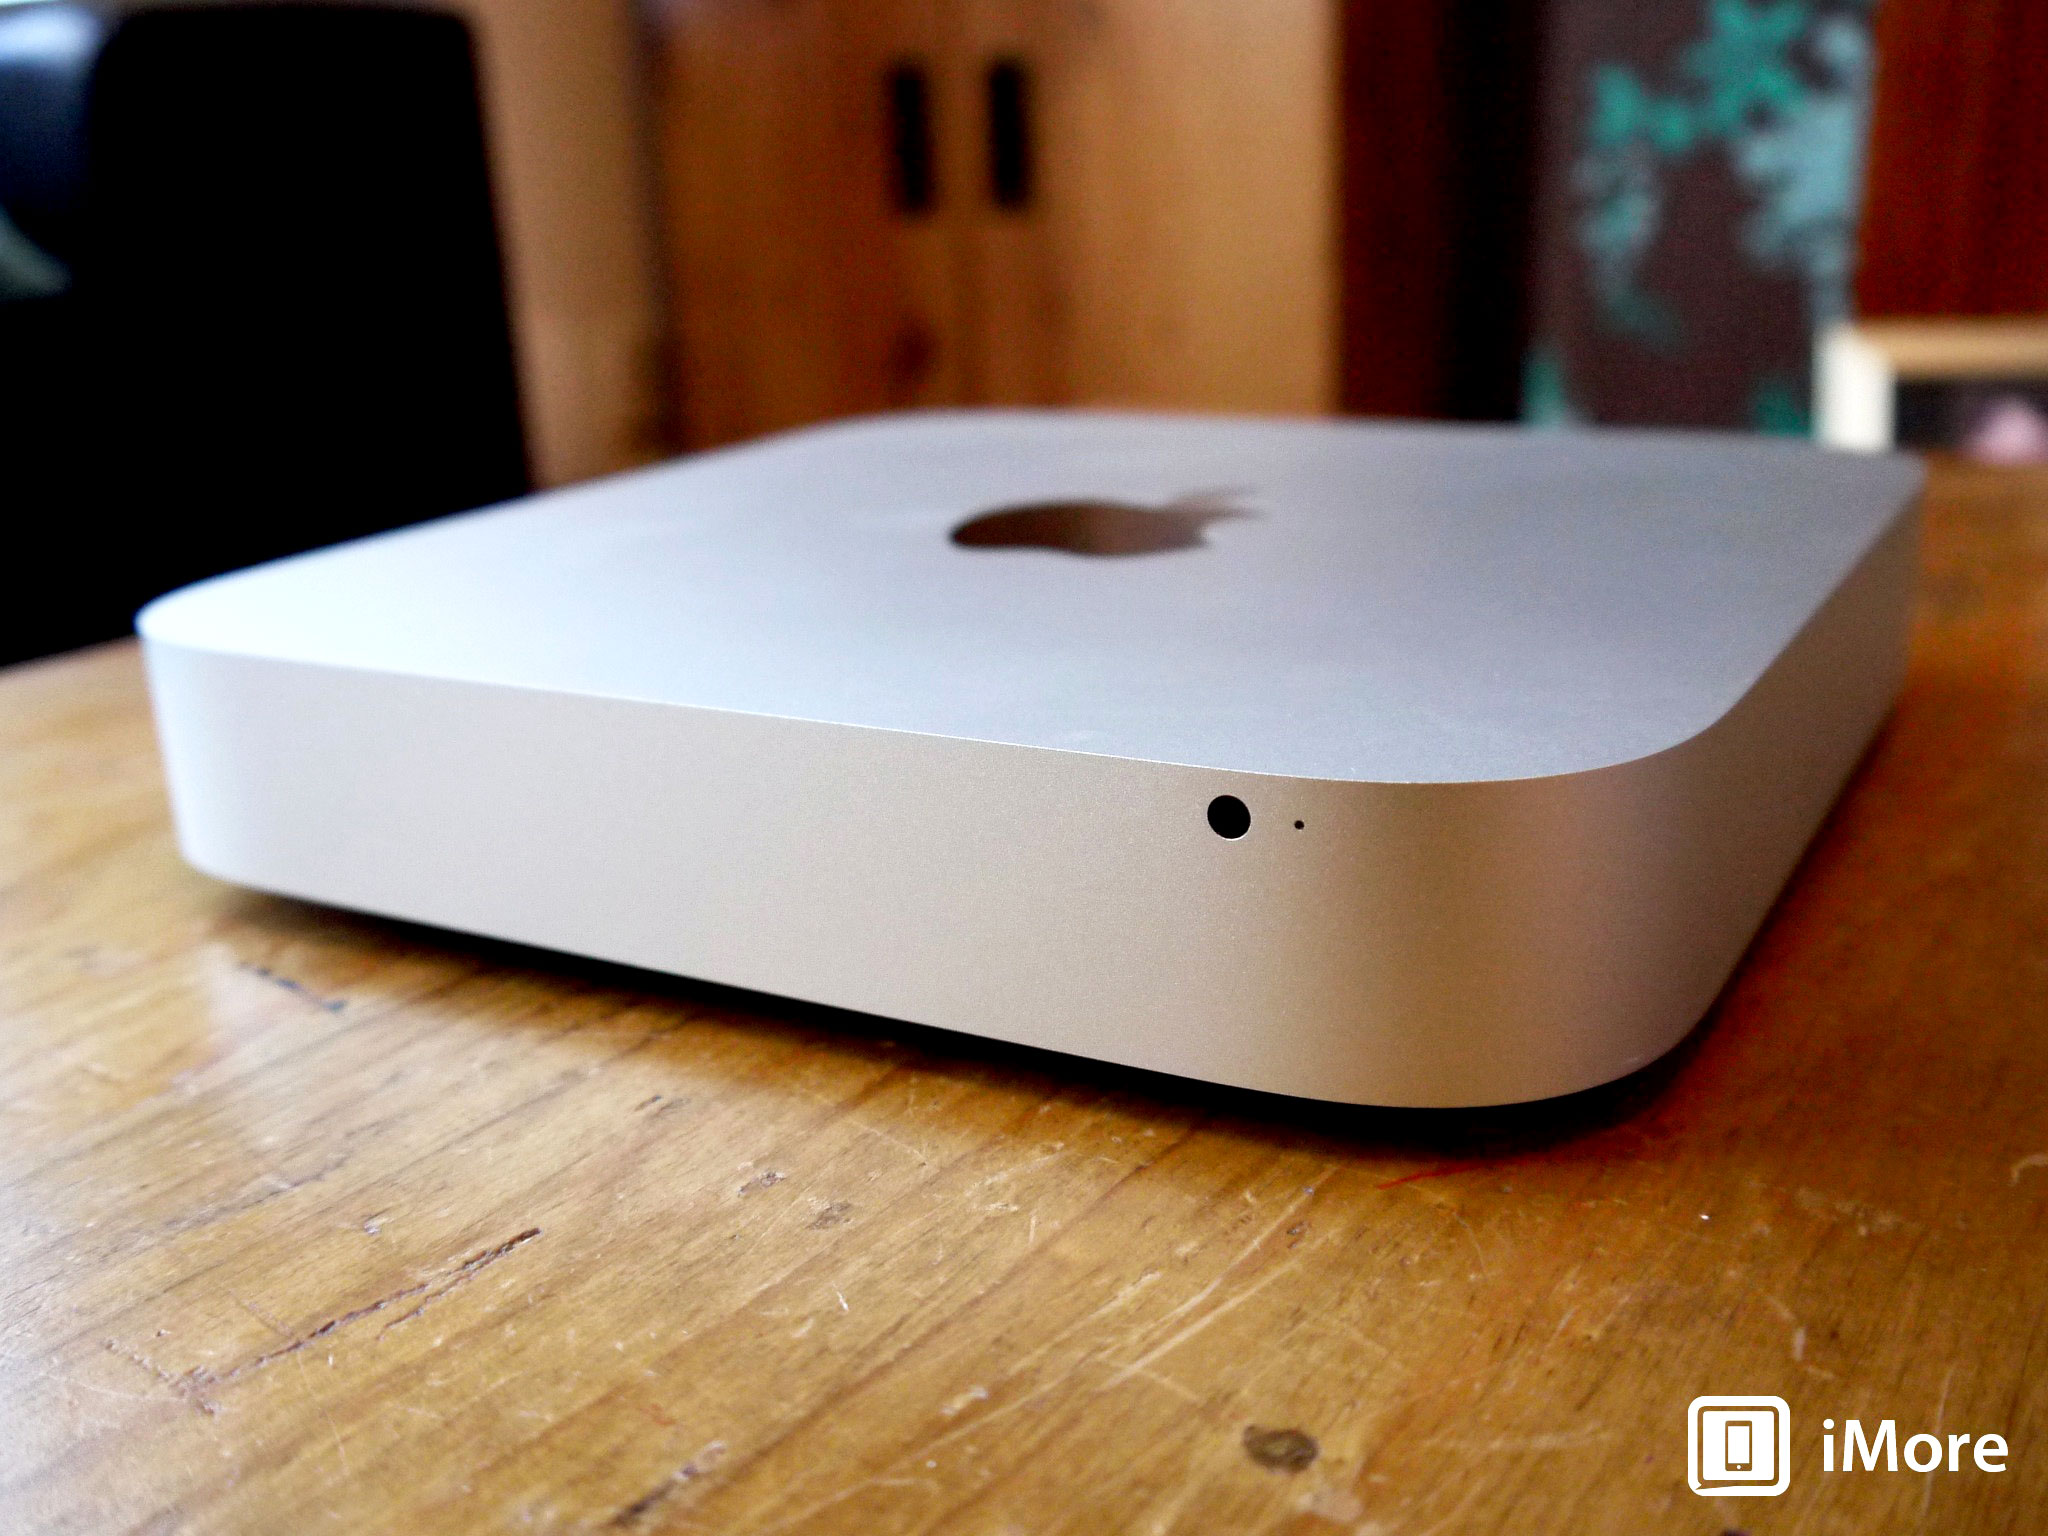 How to set up a Mac mini-based media server part I: Physical connections